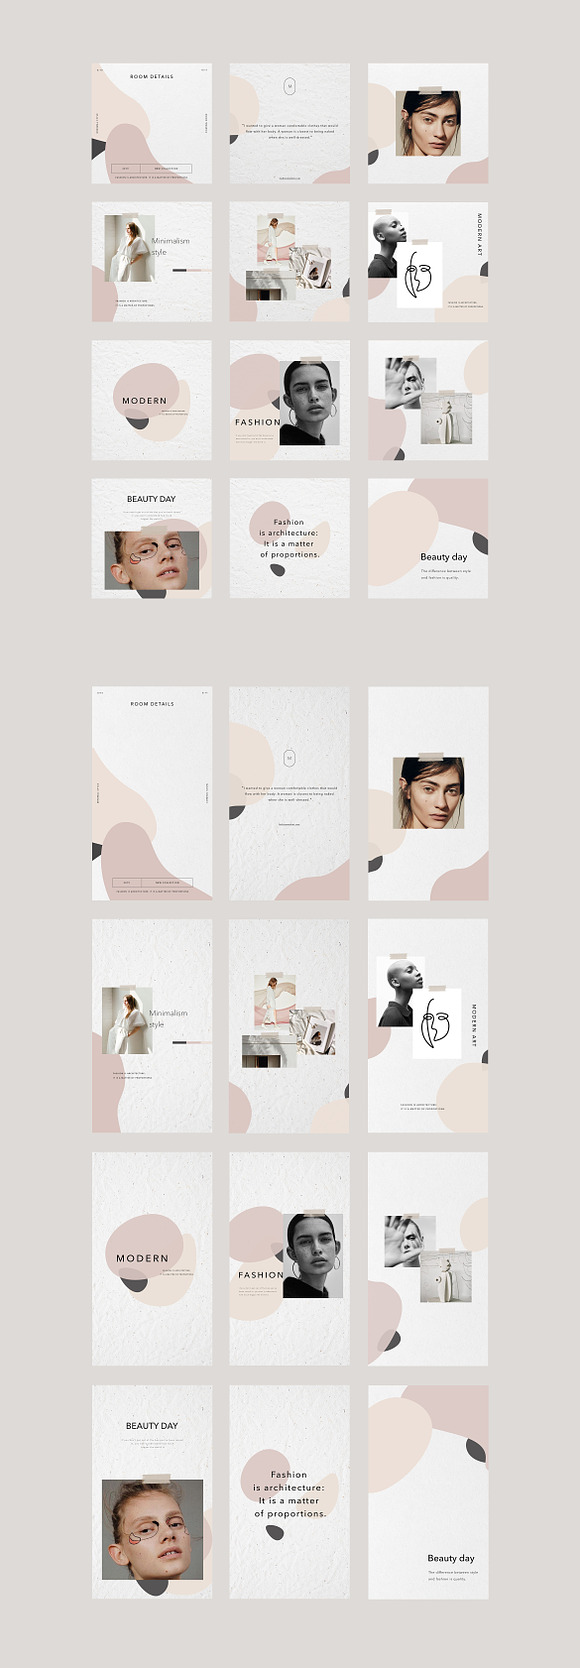 Eiwa - Social Media pack in Instagram Templates - product preview 8